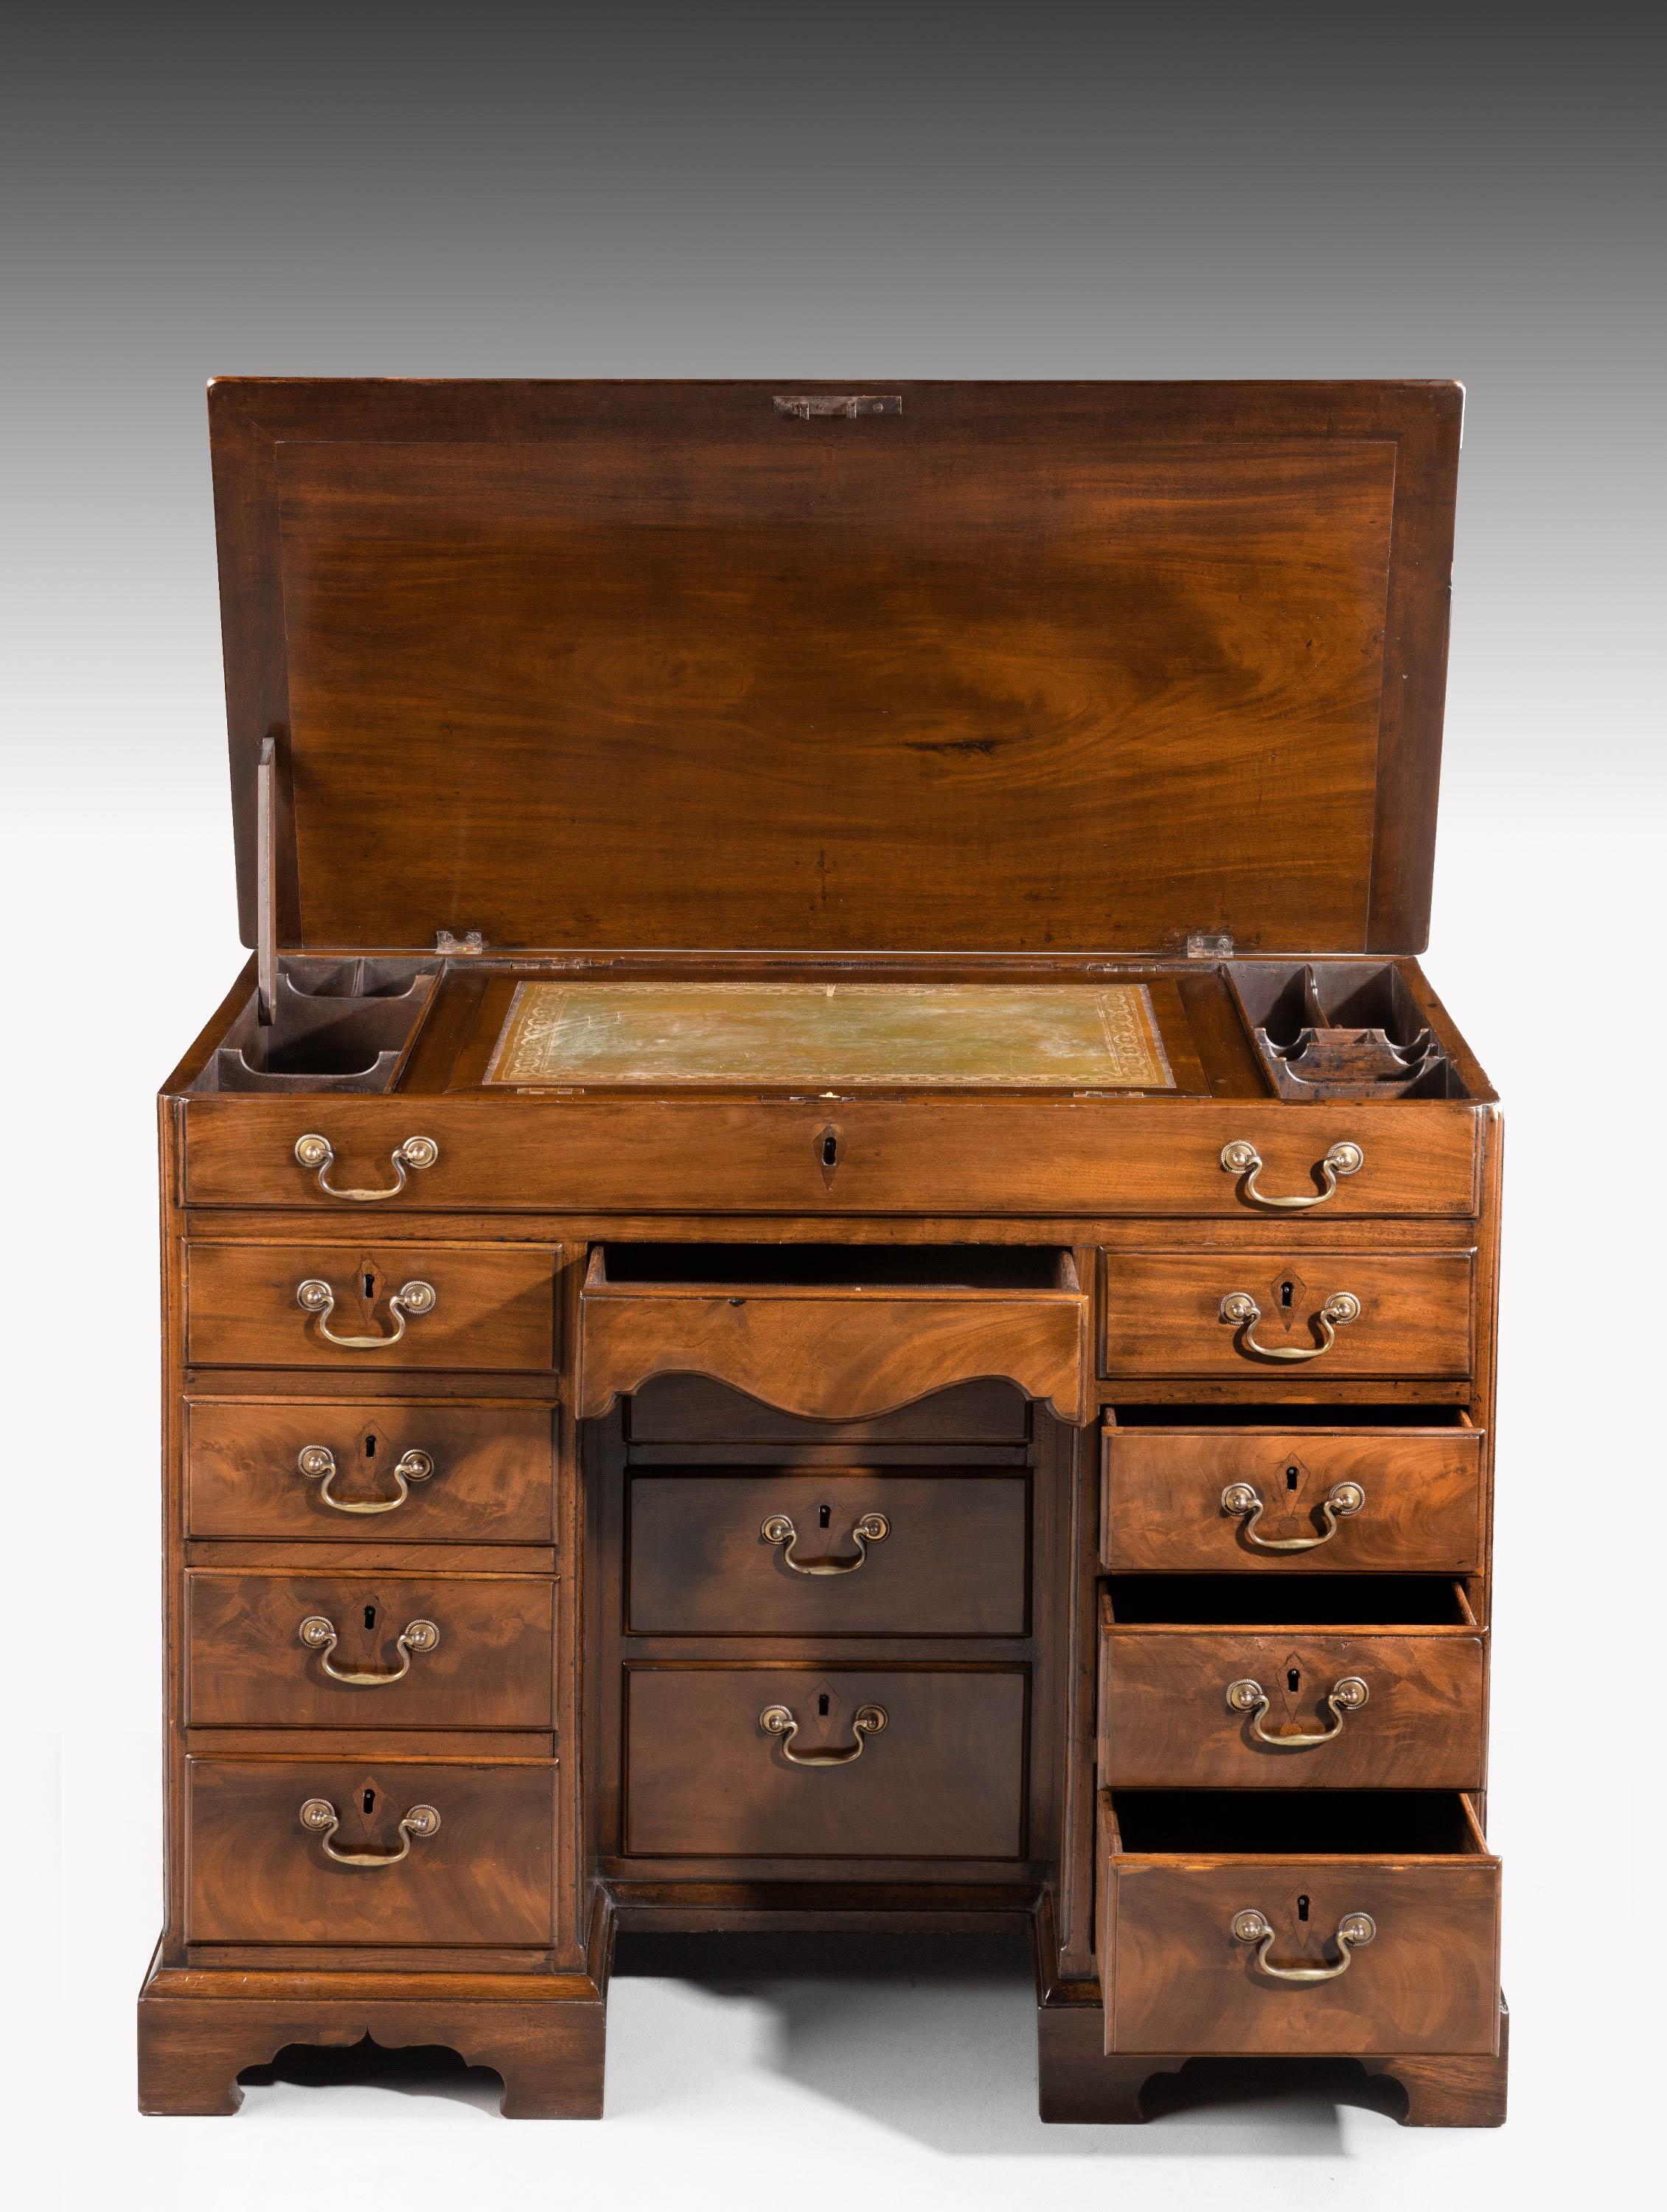 Chippendale Period Kneehole Desk or Dressing Table In Good Condition In Peterborough, Northamptonshire